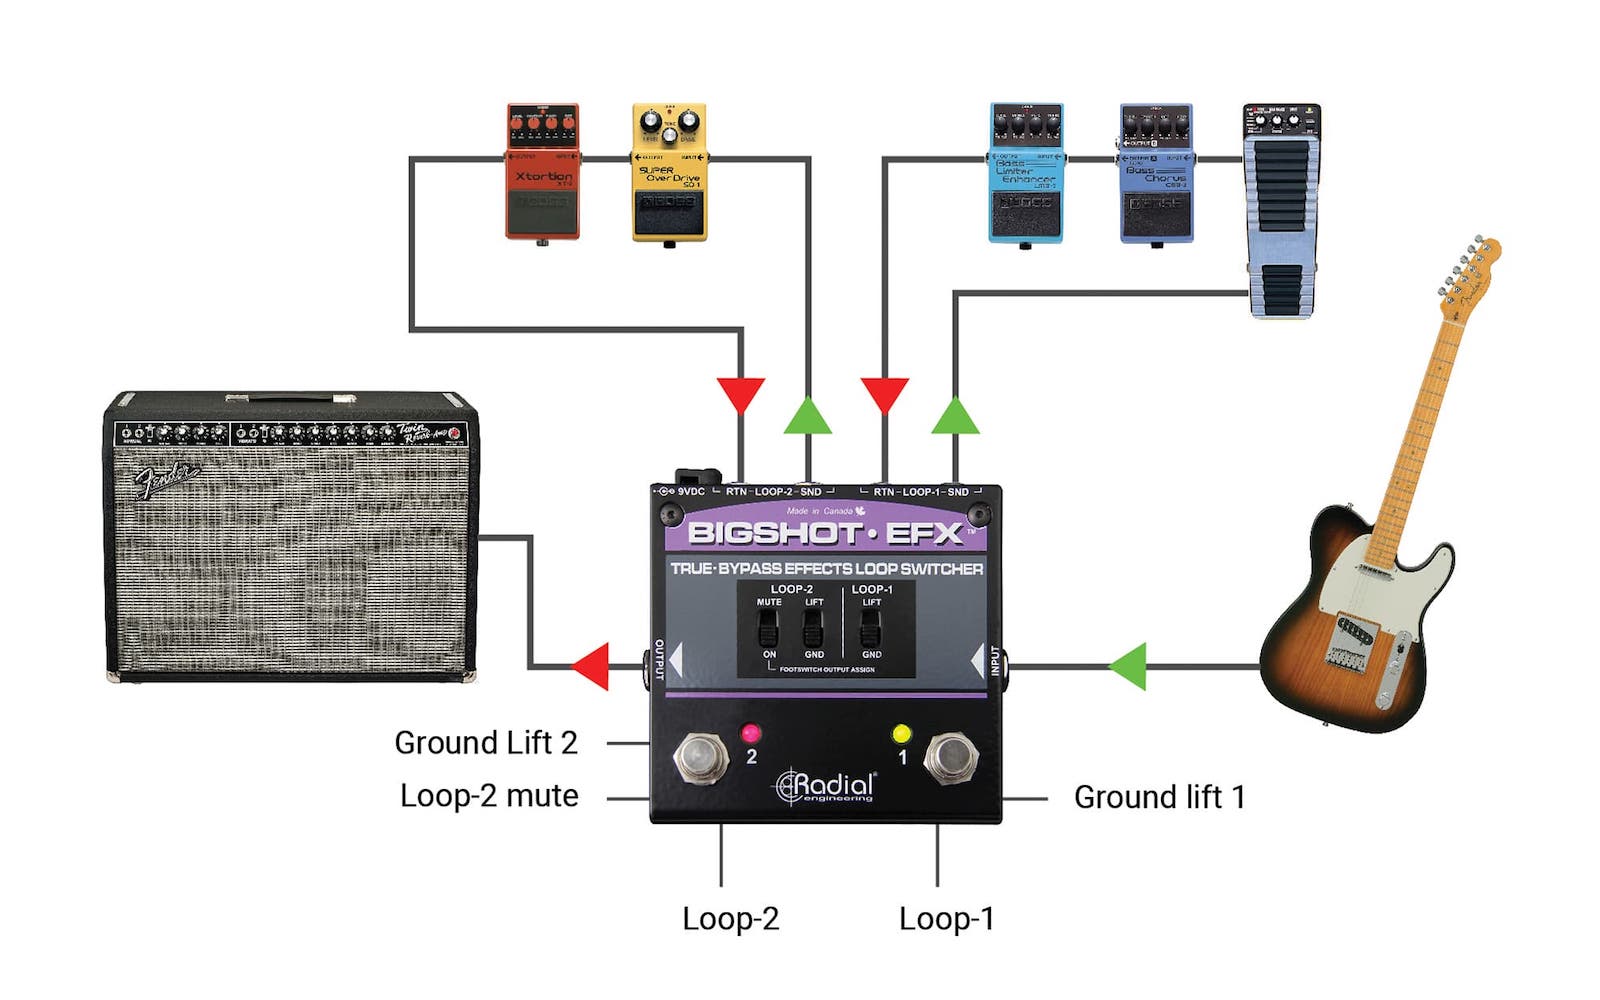 A rudimentary example of how a loop switcher pedal can work, featuring the Radial Engineering BigShot EFX